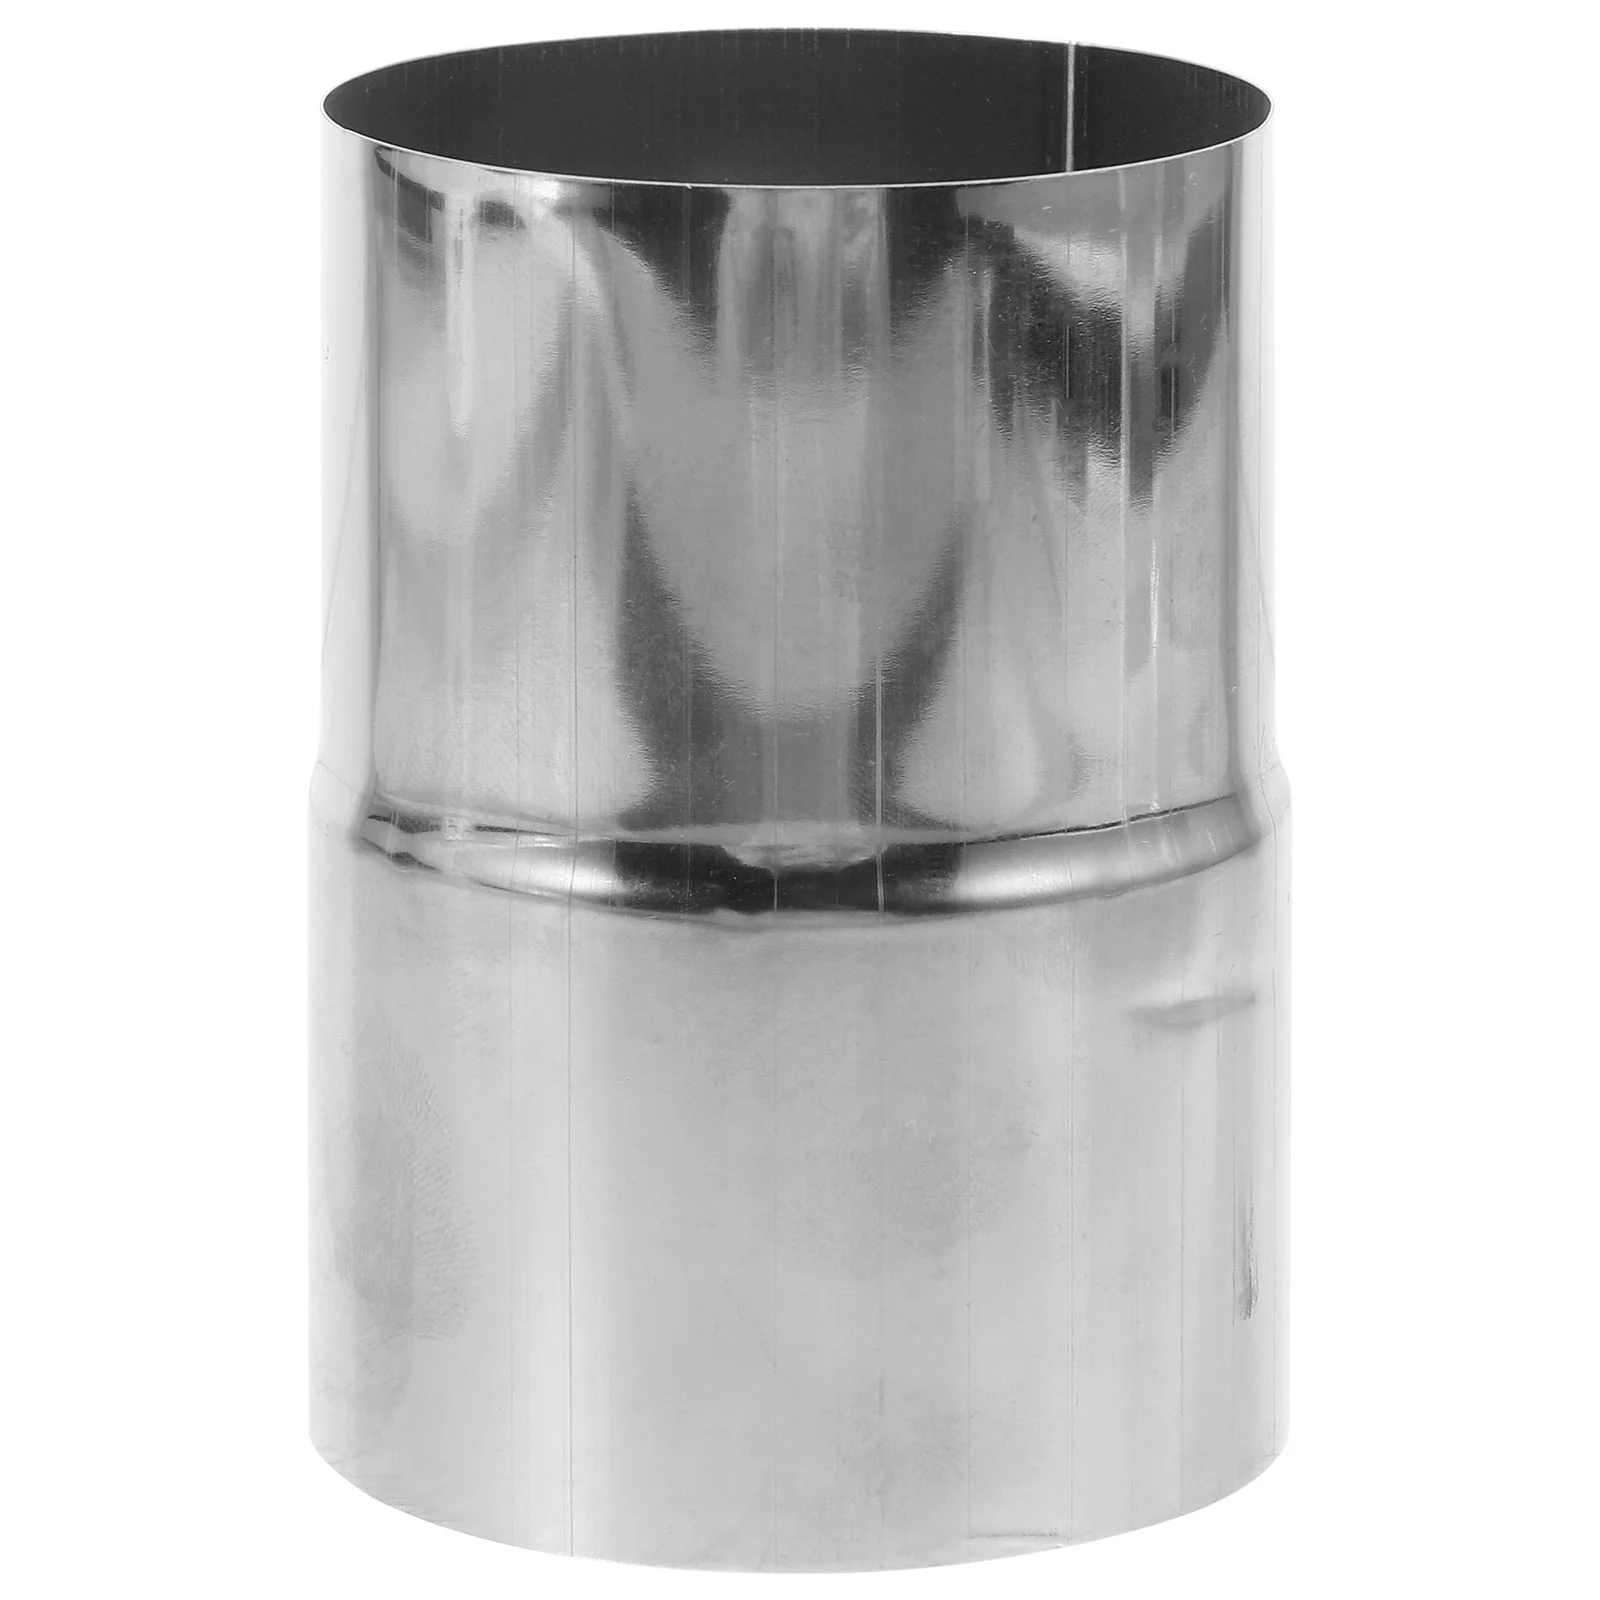 

Stainless Steel Exhaust Tubing Chimney Pipe Fitting Stove Accessories Metal Connector Adapter Increaser